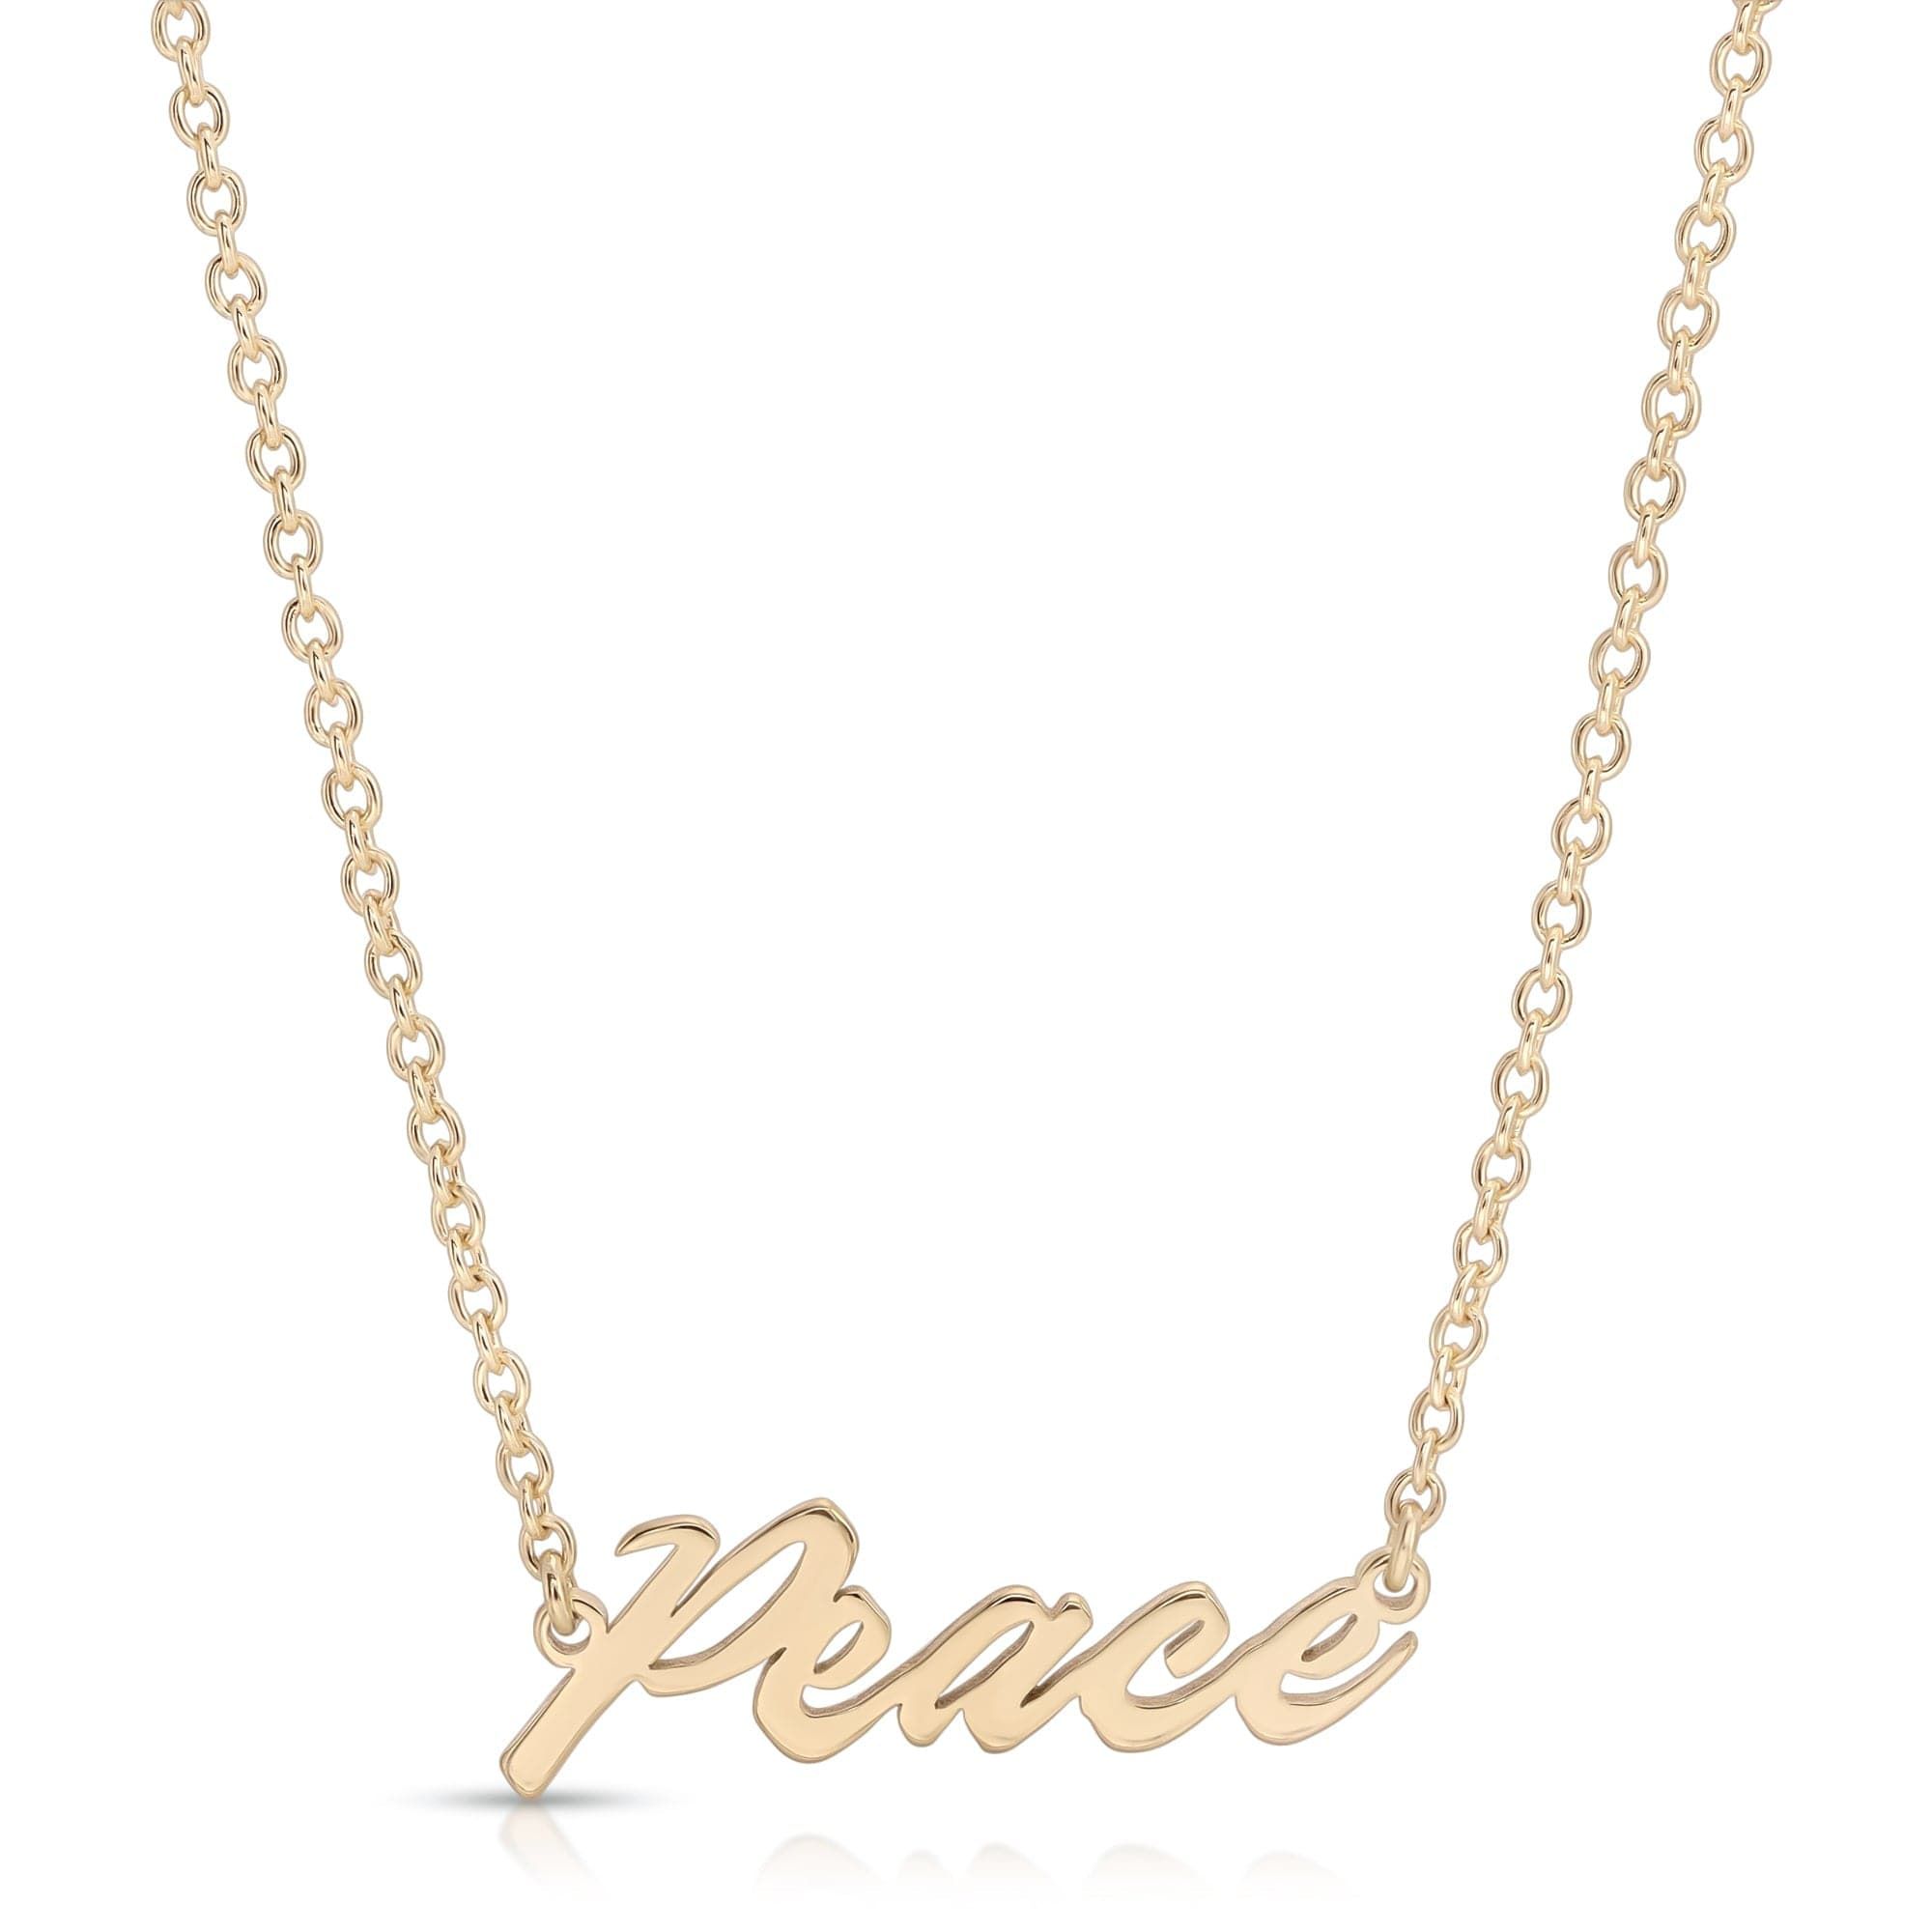 a gold necklace with the word peace on it